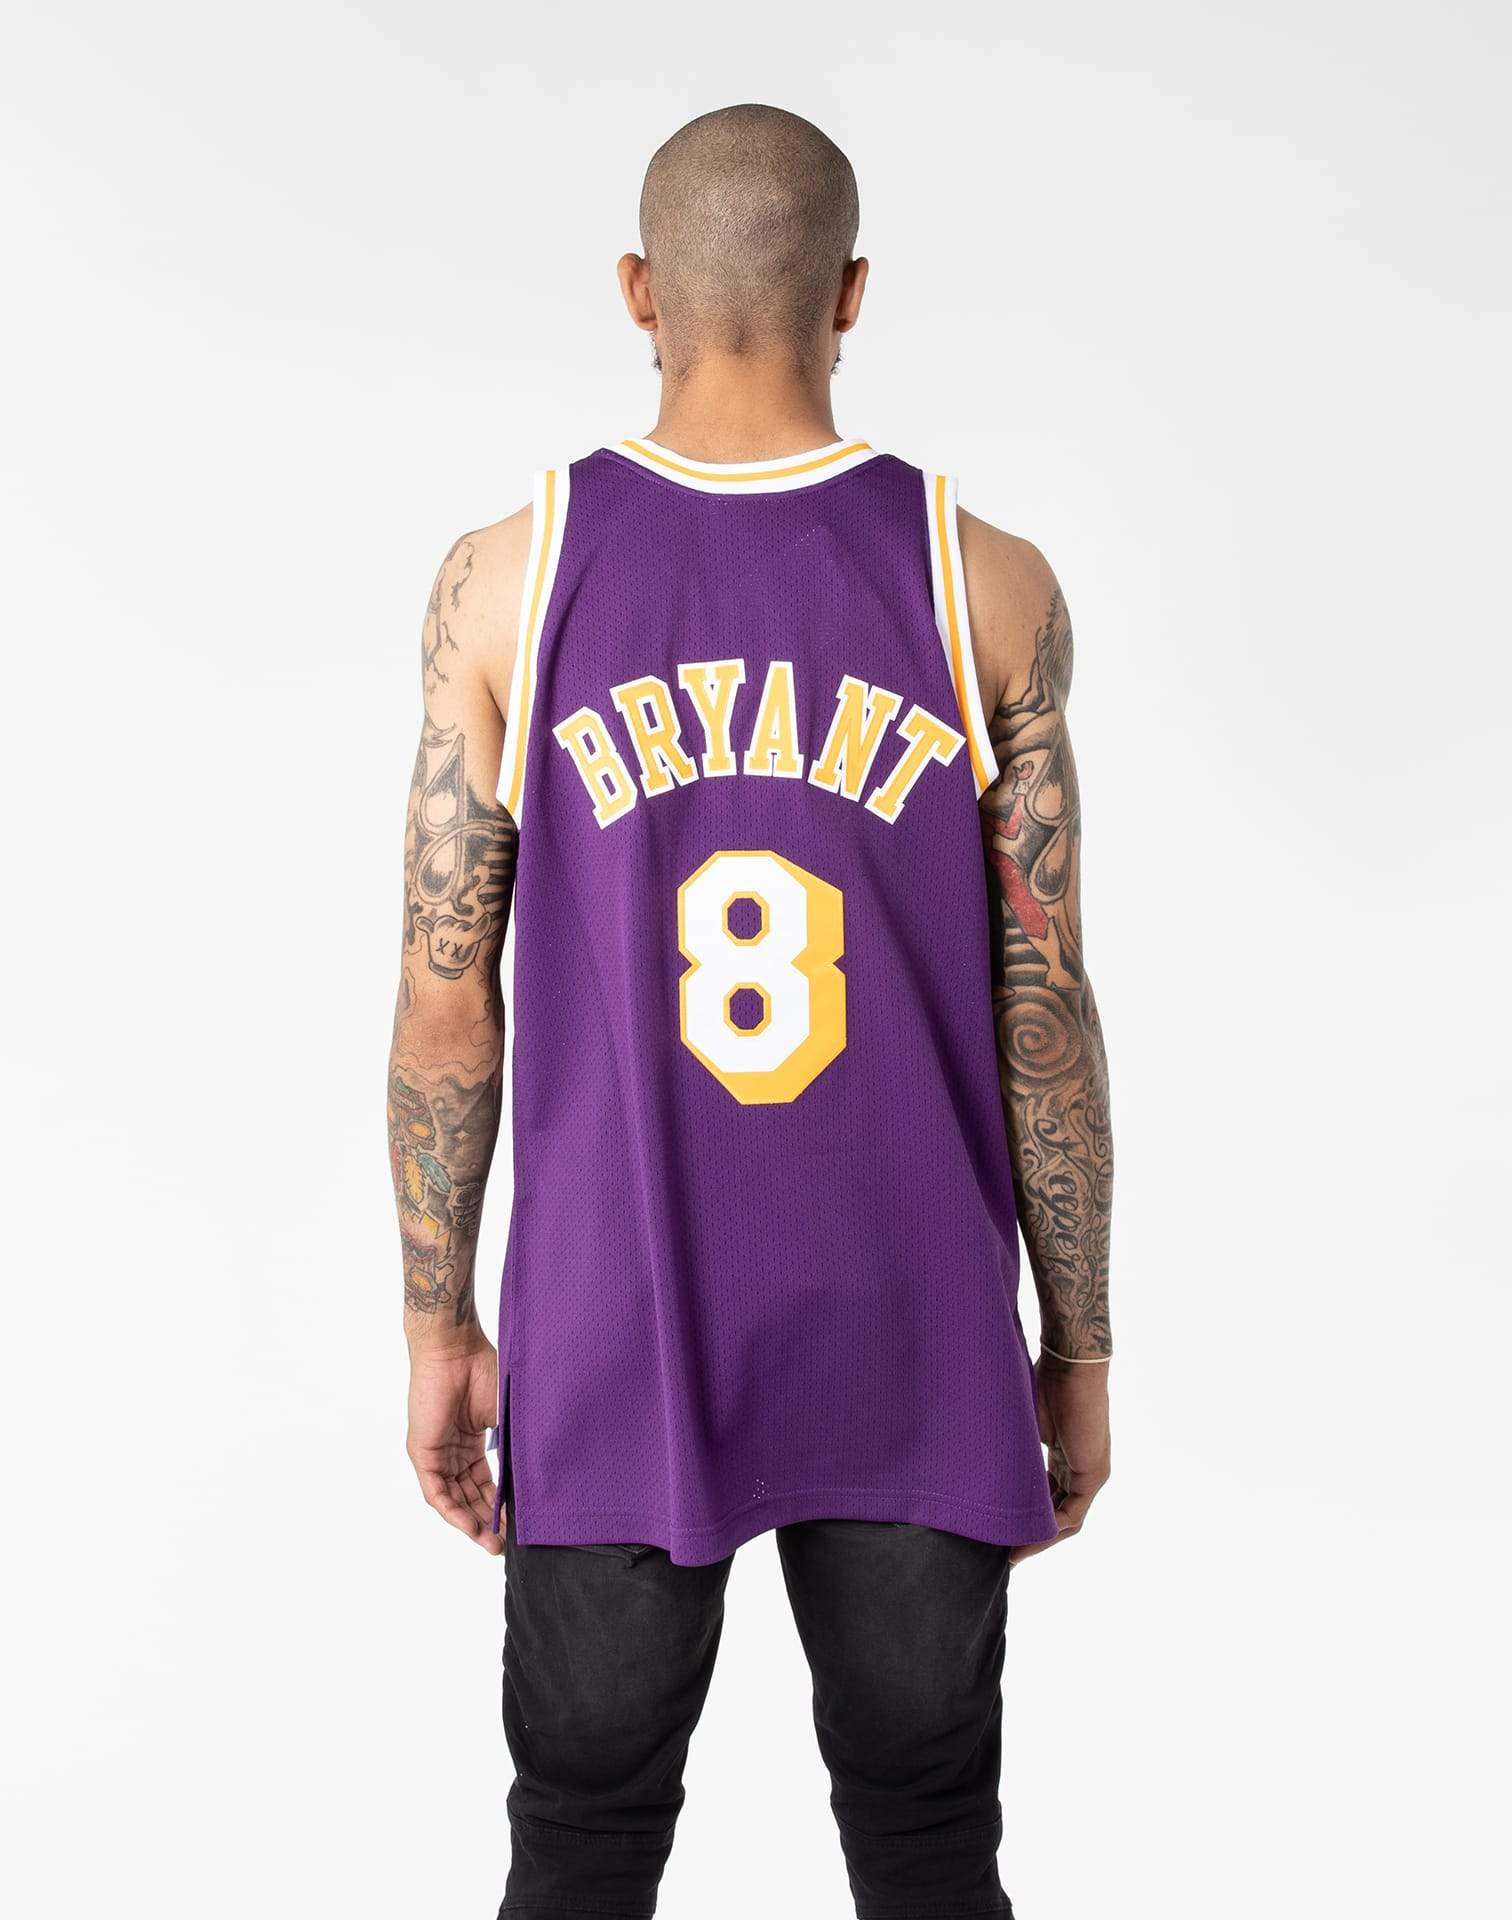 Mitchell & Ness Men's Los Angeles Lakers Authentic Jersey - Kobe